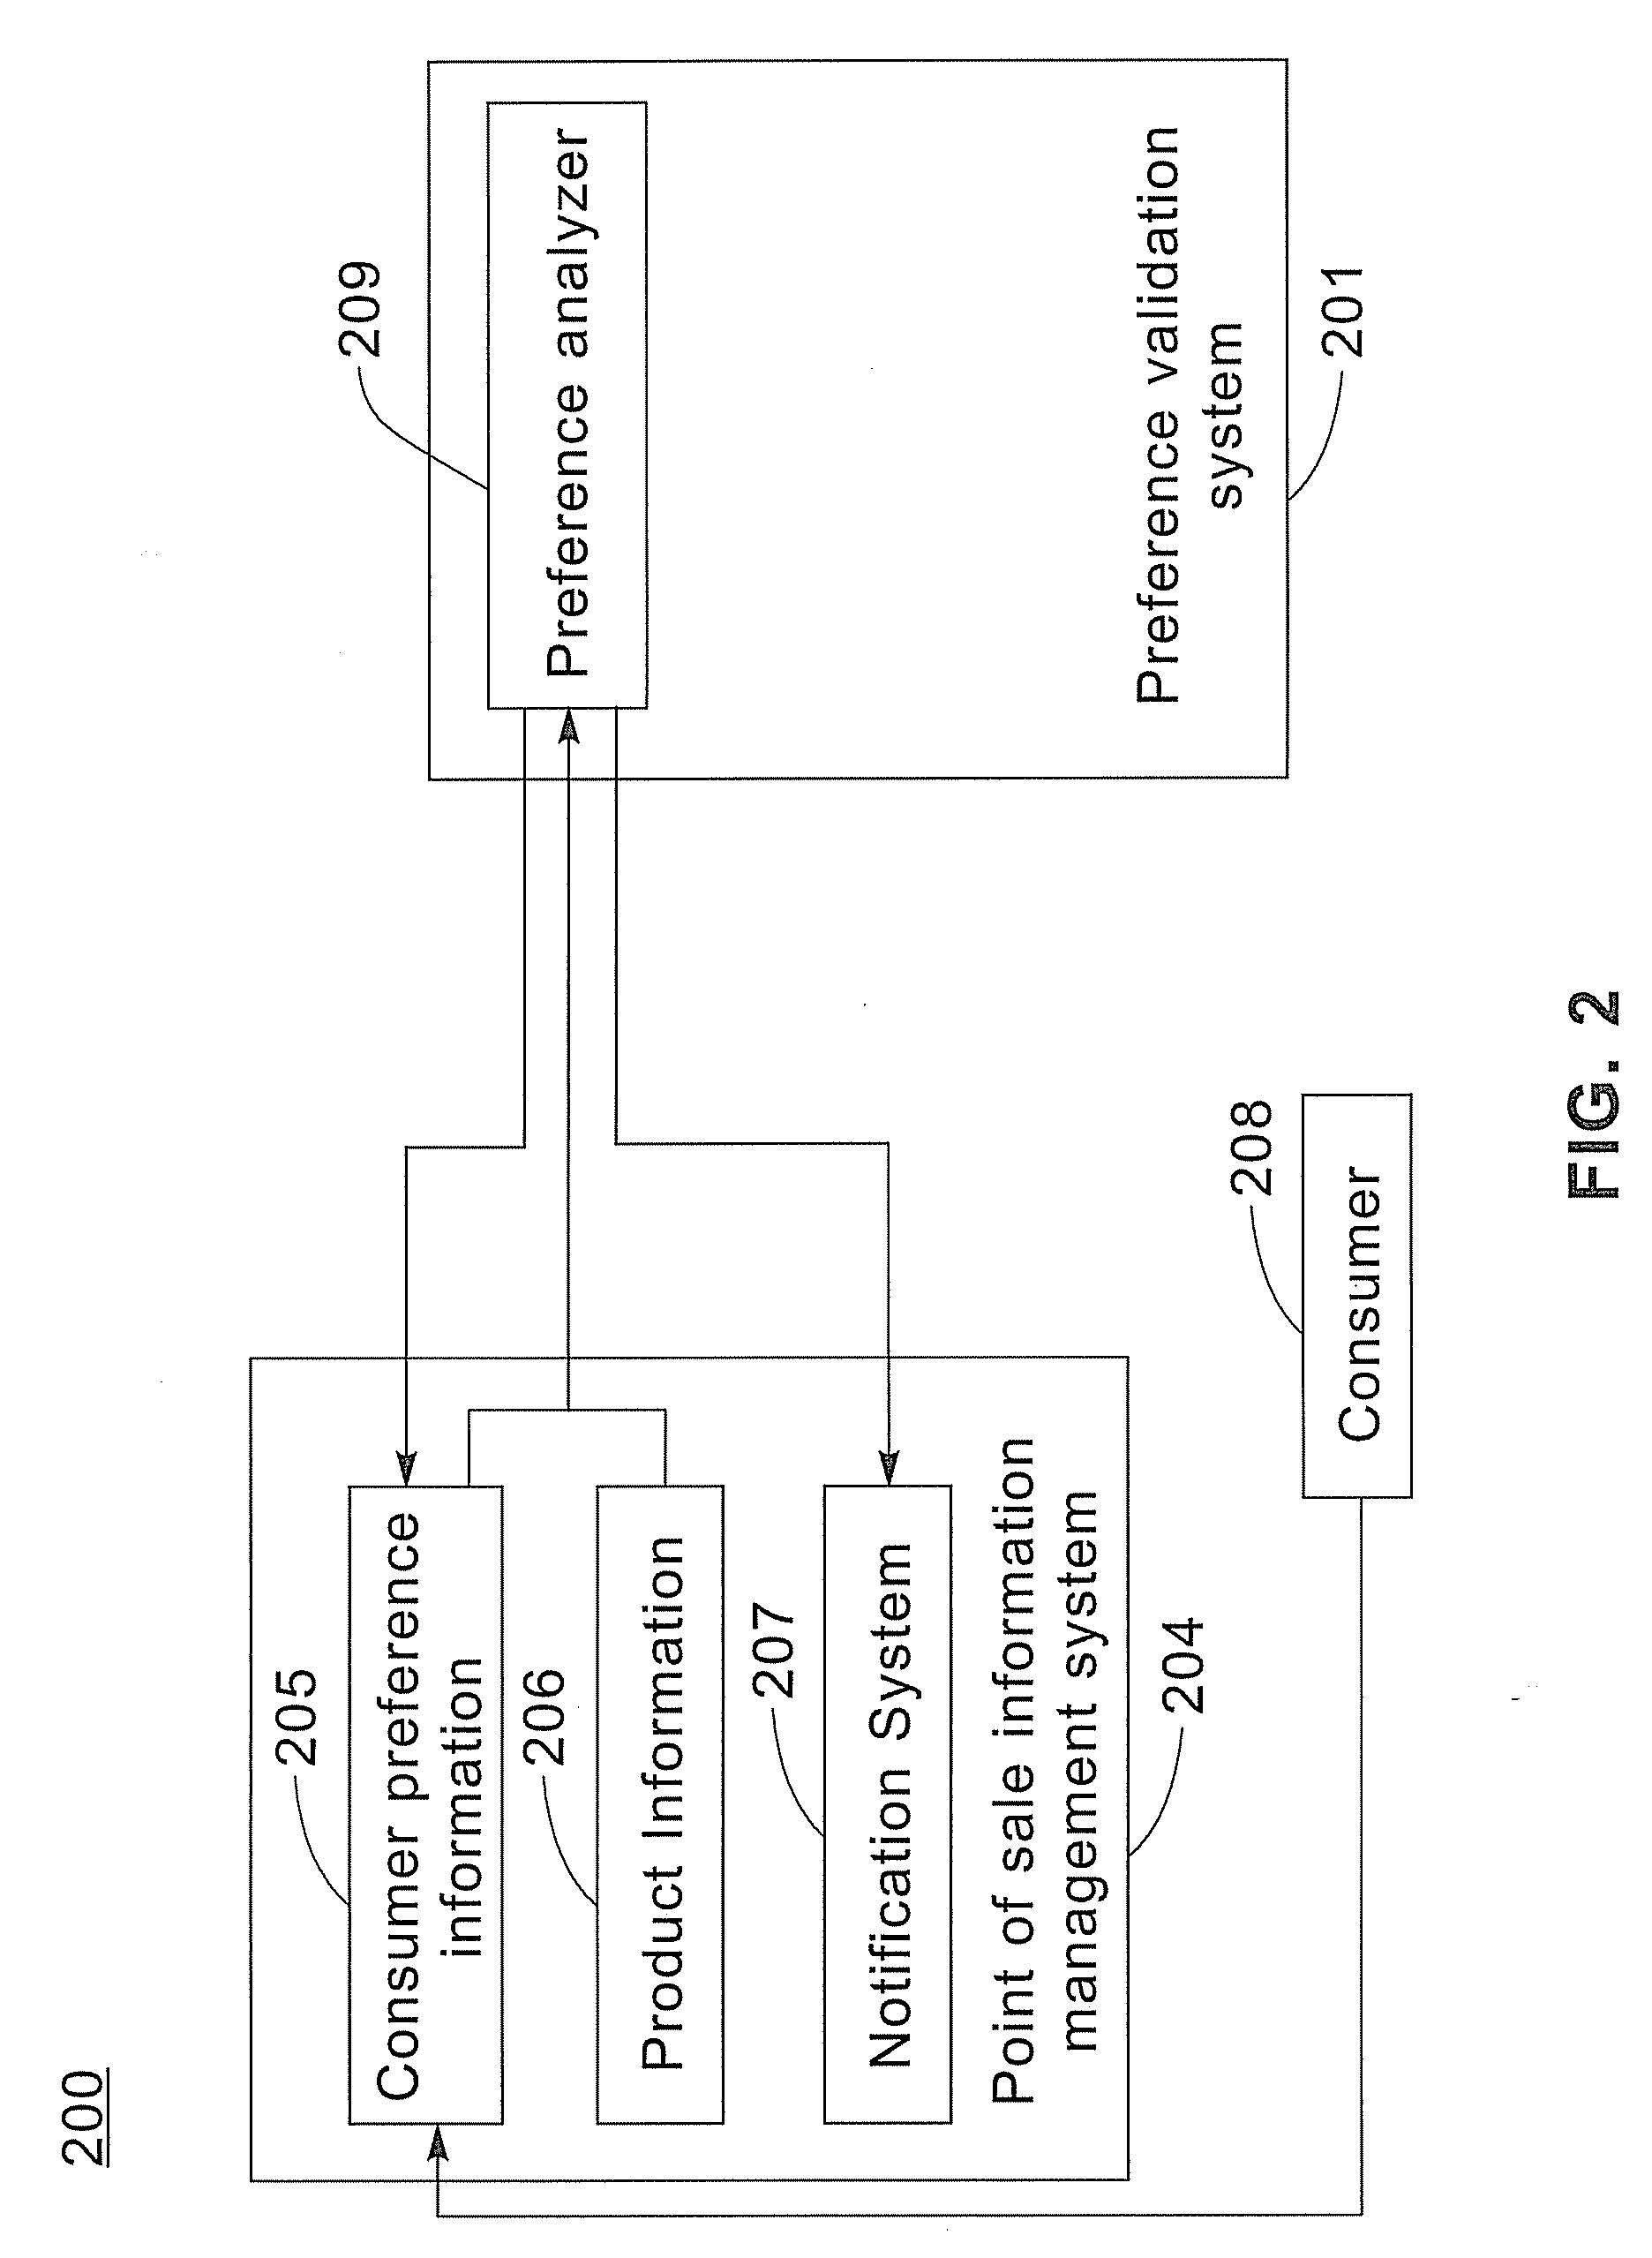 Method and system for validating consumer preferences and purchase items at point of sale